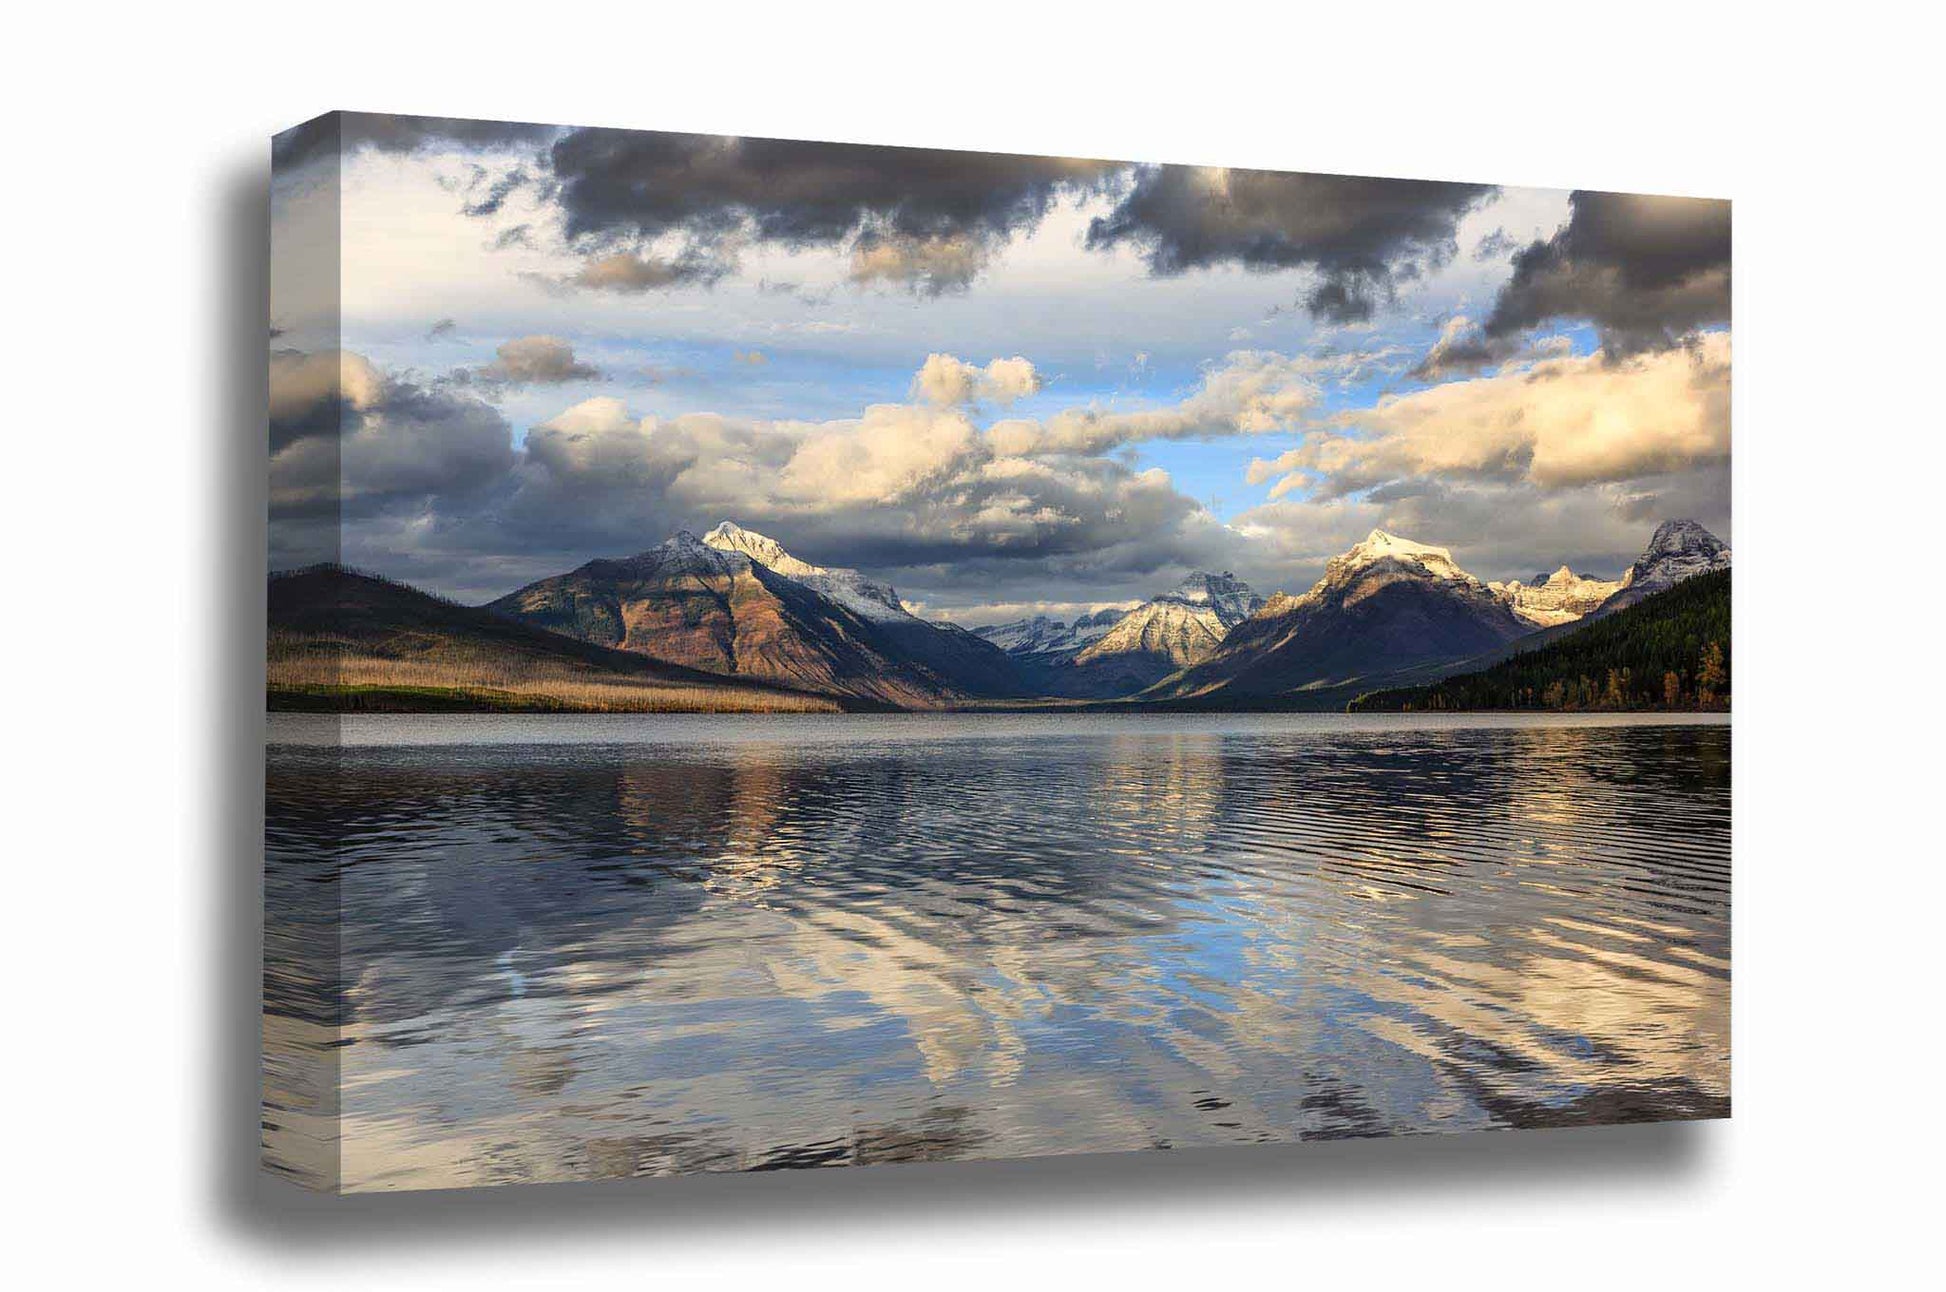 Rocky Mountain canvas wall art of snowy peaks overlooking Lake McDonald on an autumn evening in Glacier National Park, Montana by Sean Ramsey of Southern Plains Photography.